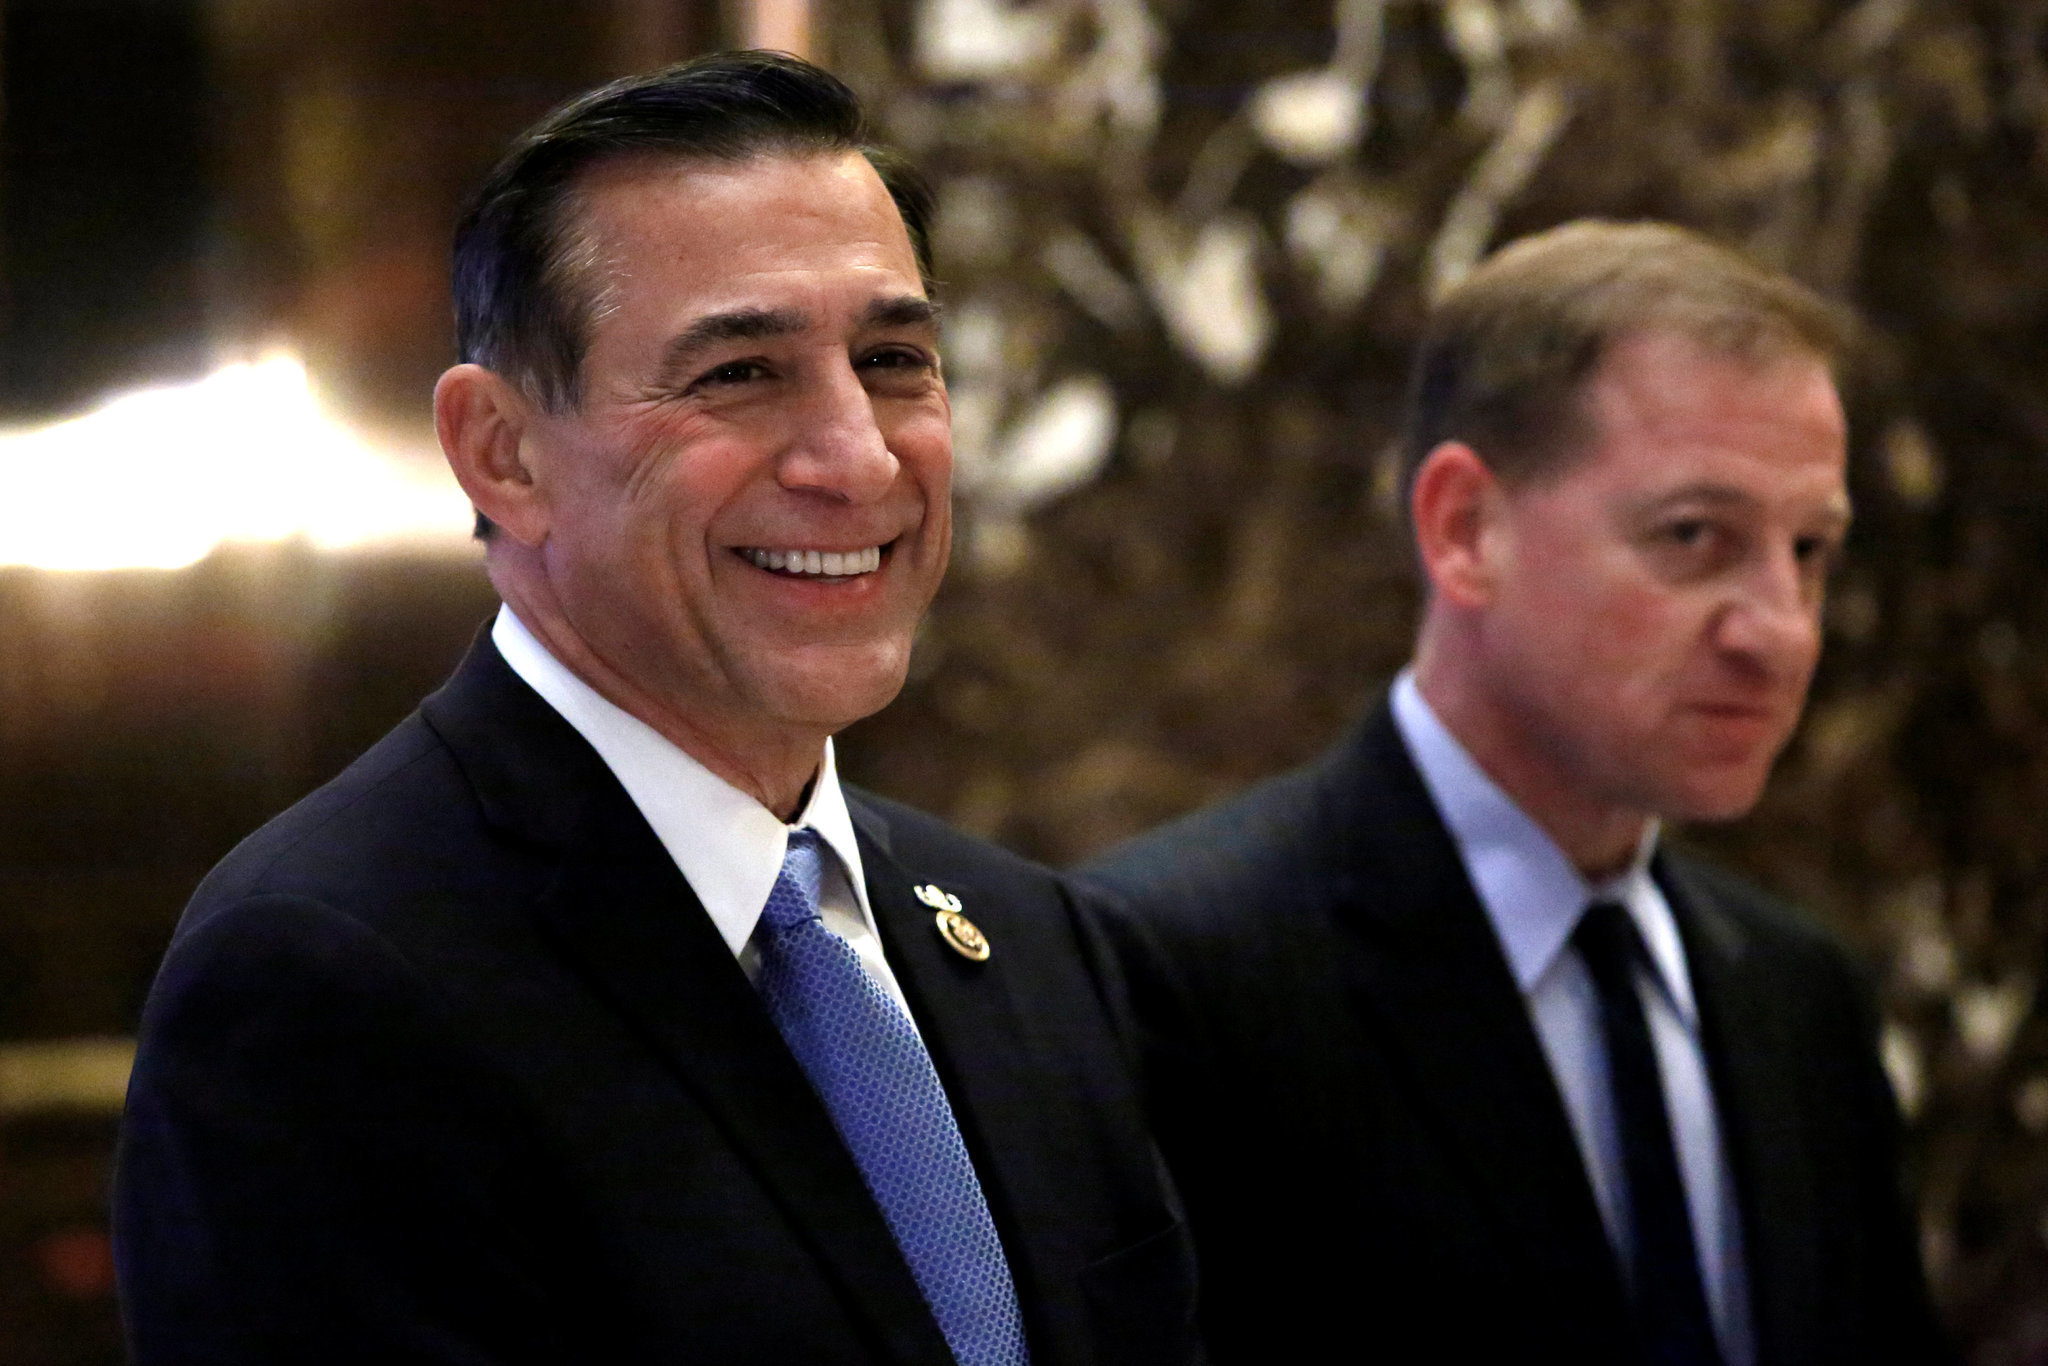 Issa votes down request to Justice Department to turn over Trump investigation documents